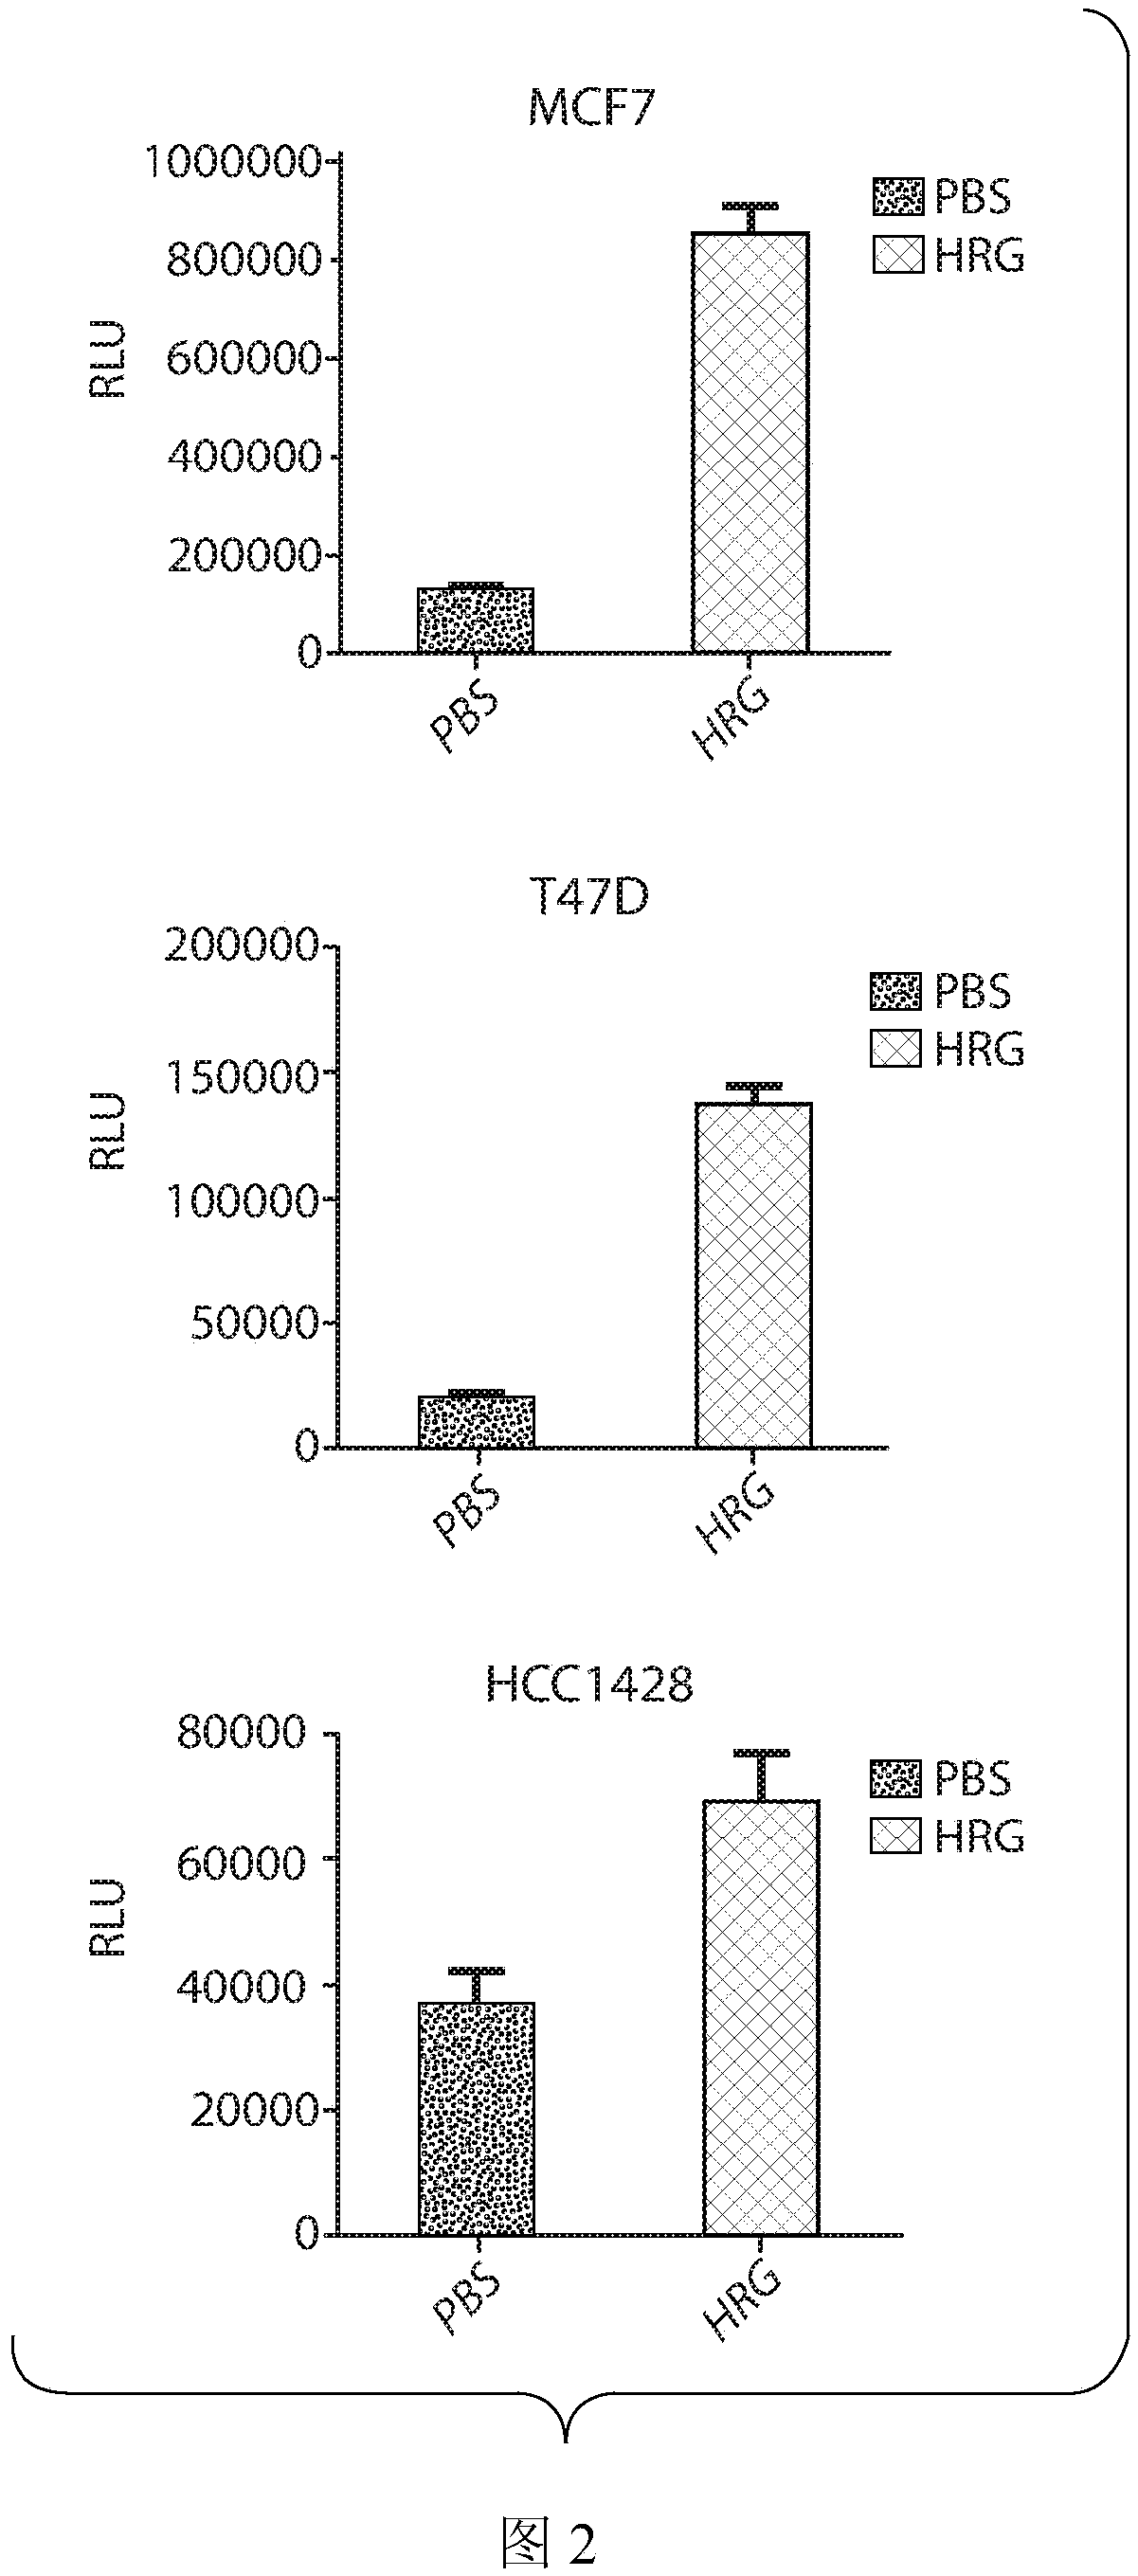 Methods for treating ER+, HER2-, HRG+ breast cancer using combination therapies comprising an anti-ERBB3 antibody